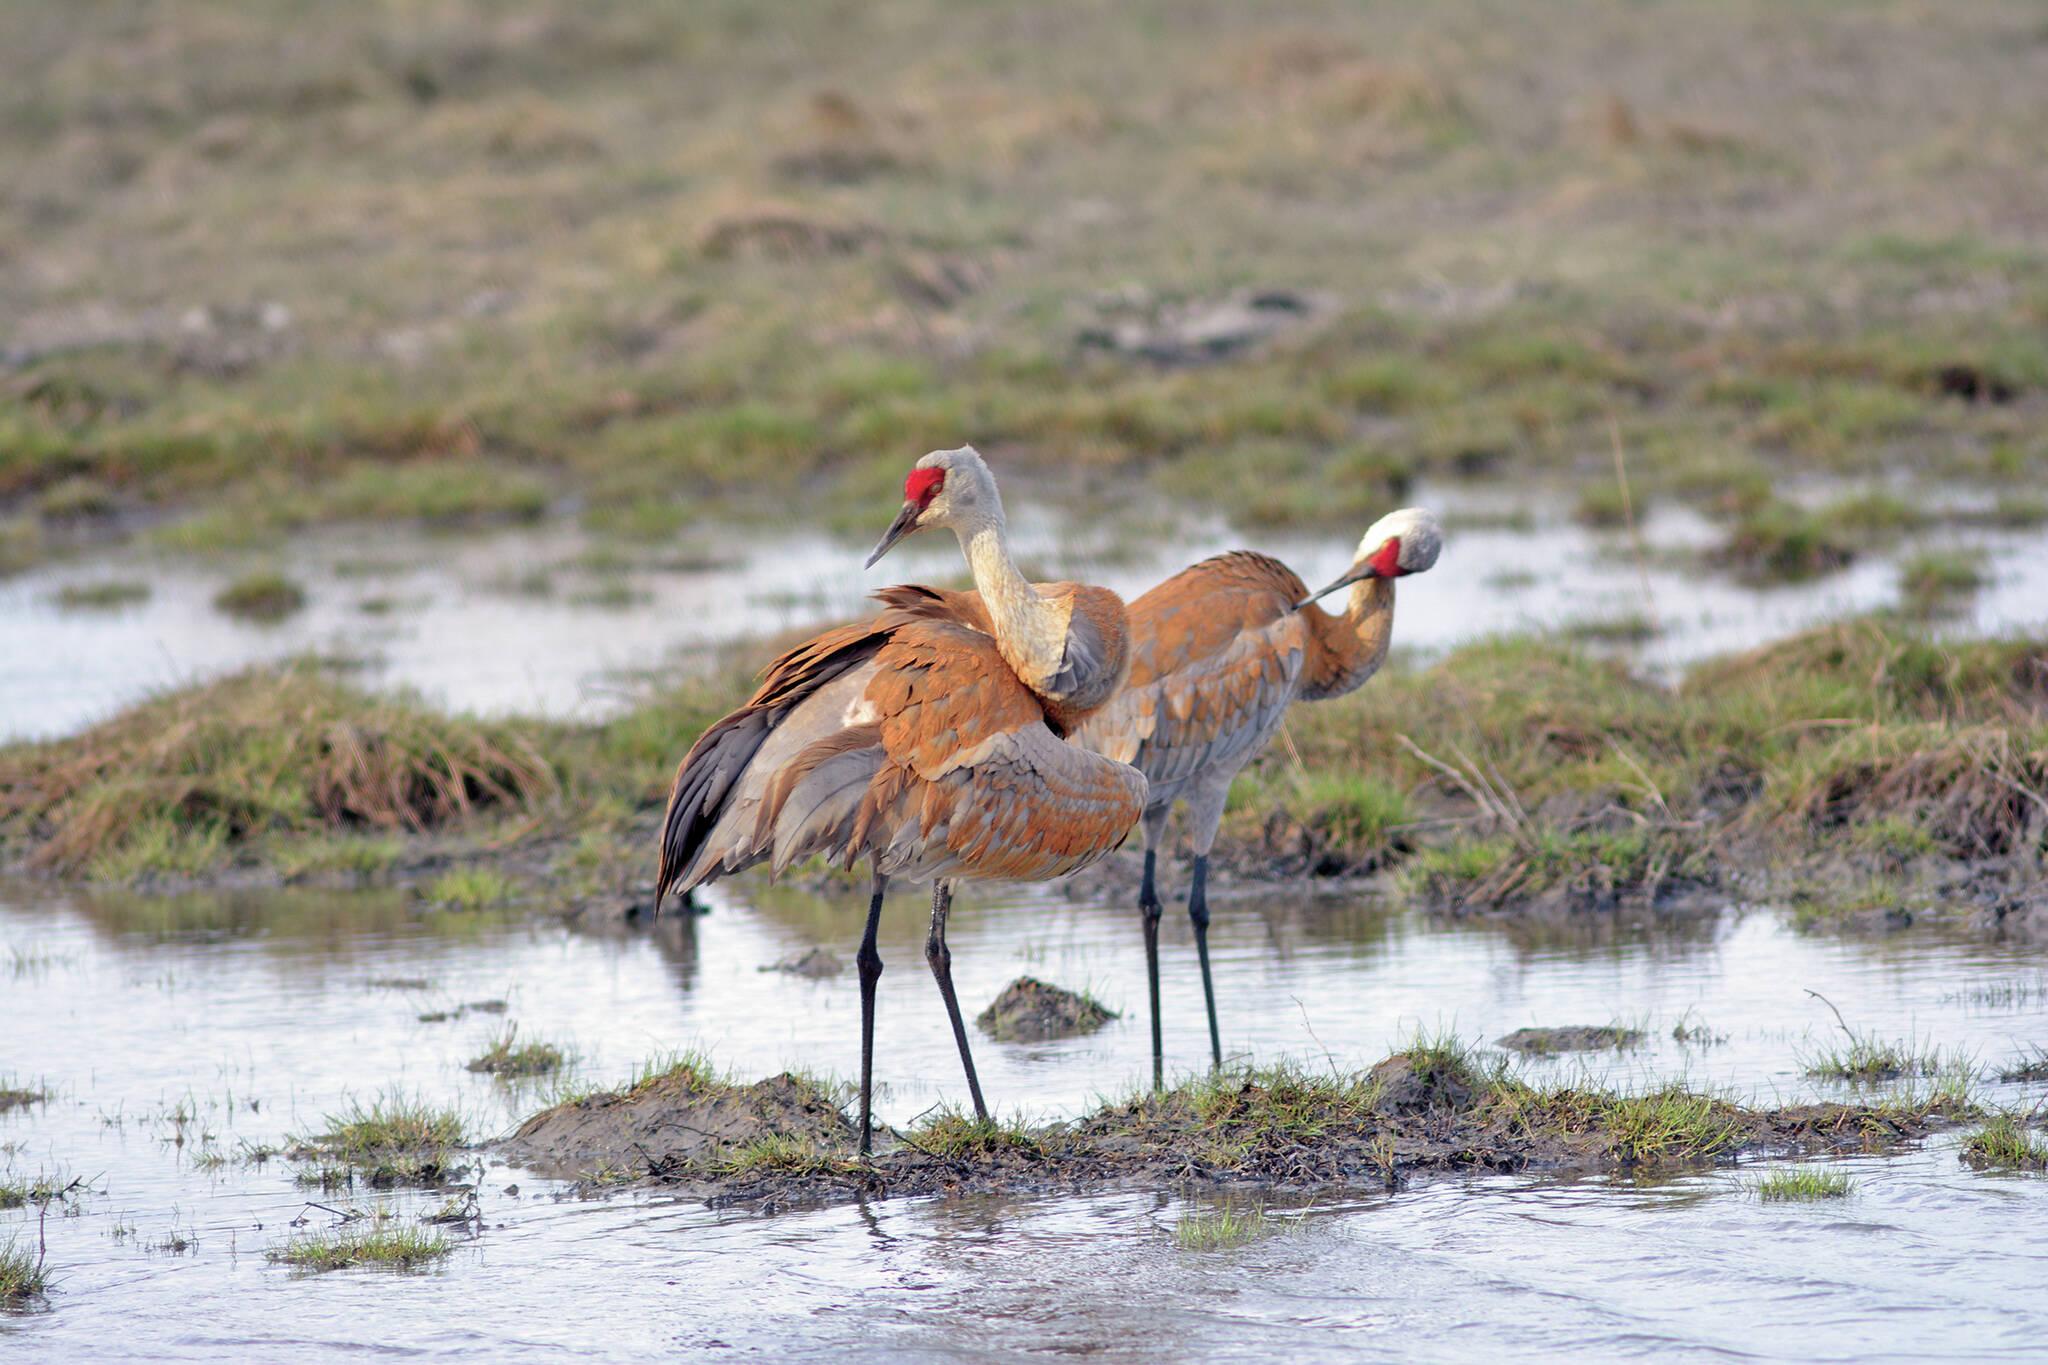 A pair of sandhill cranes feed Friday, May 8 at Green Timbers on the Homer Spit in Homer. (Photo by Michael Armstrong/Homer News)